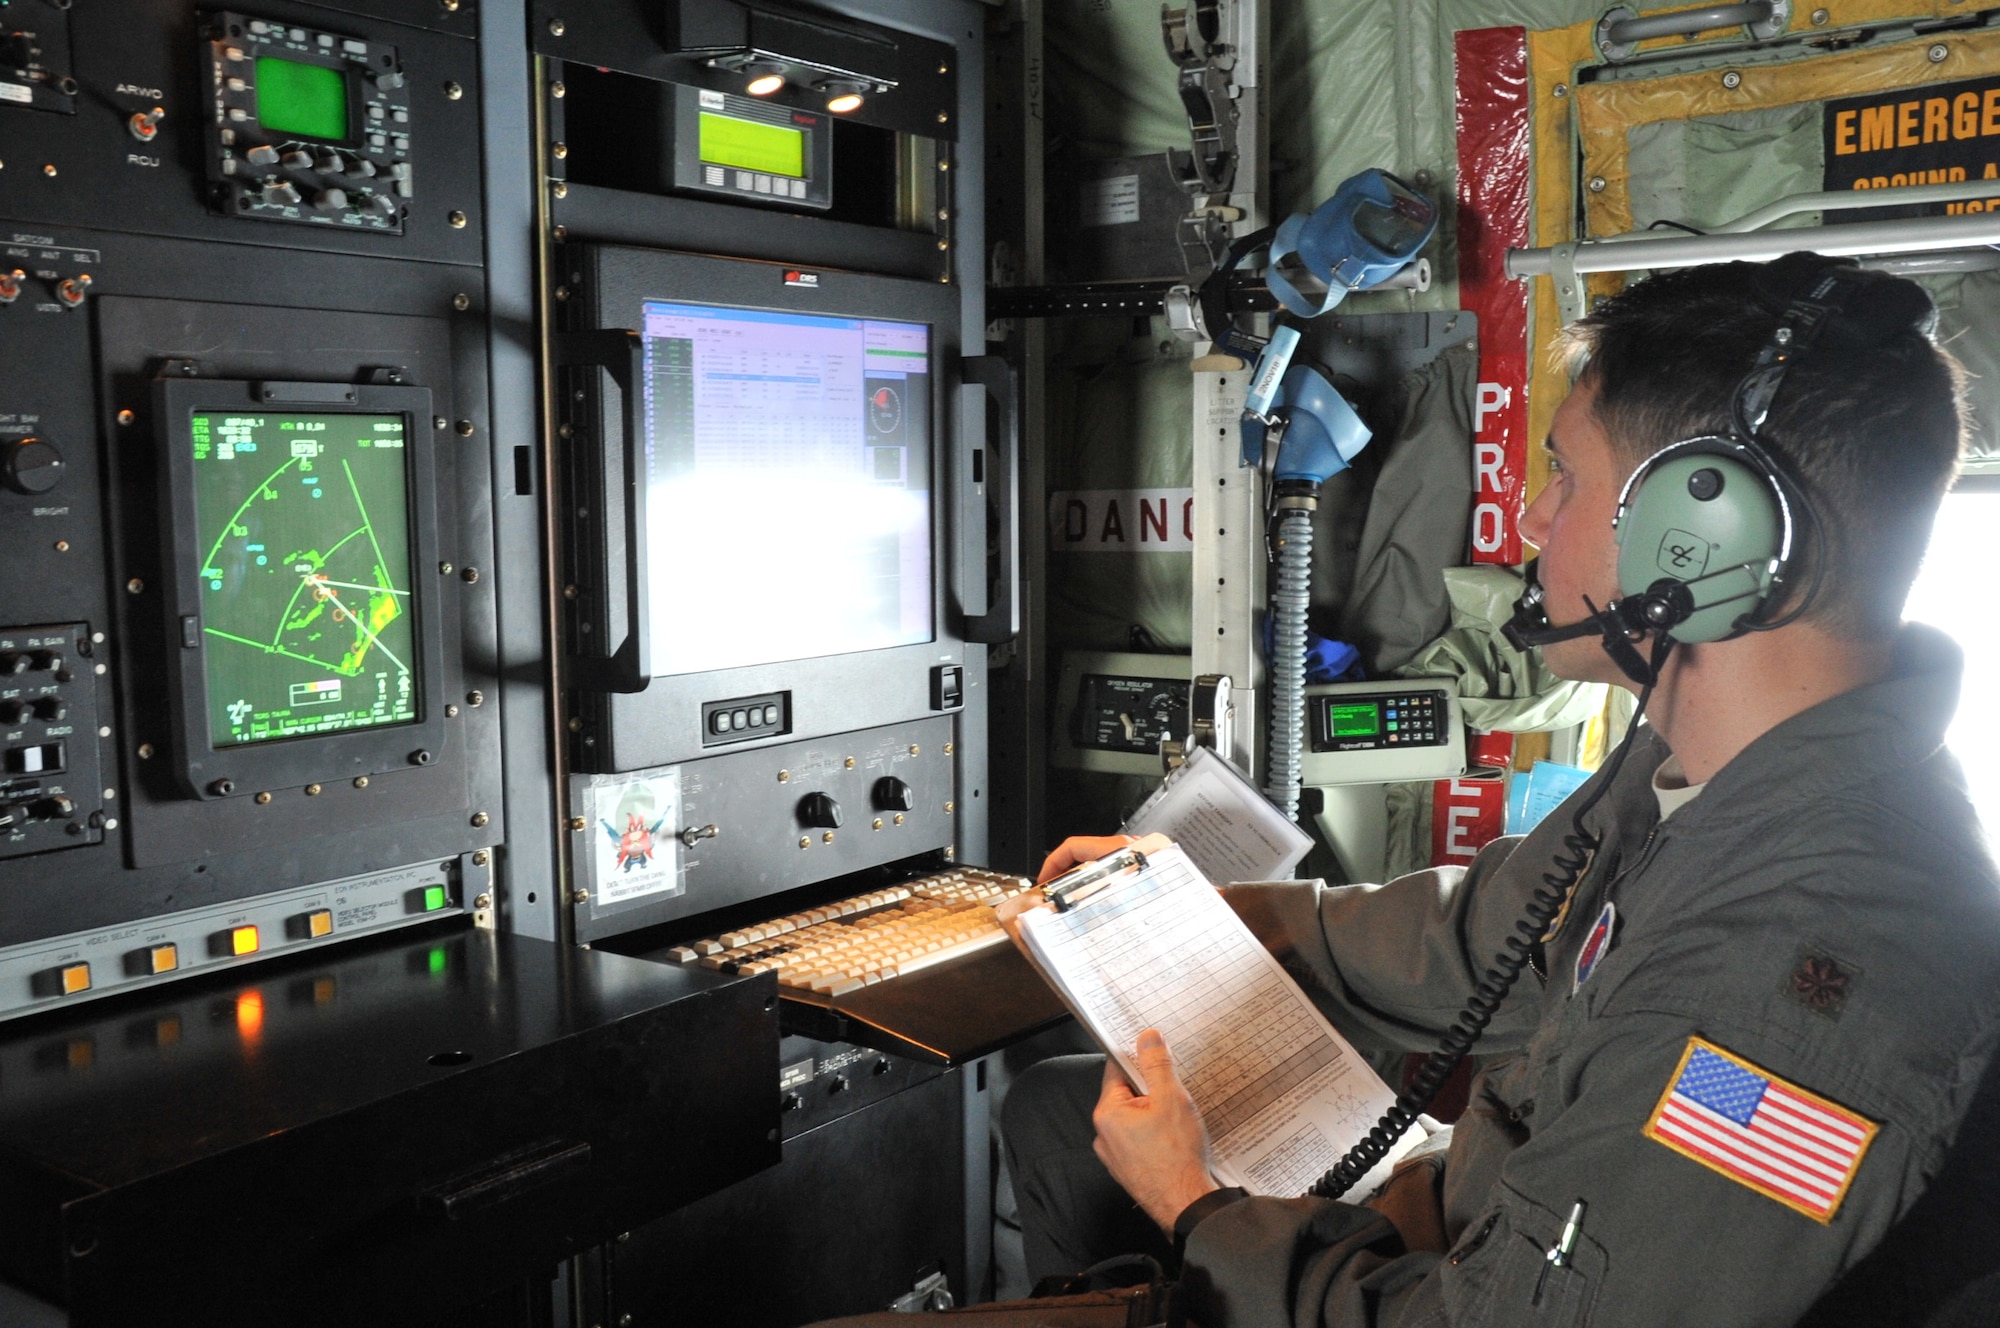 A weather officer looks at screens inside an aircraft.